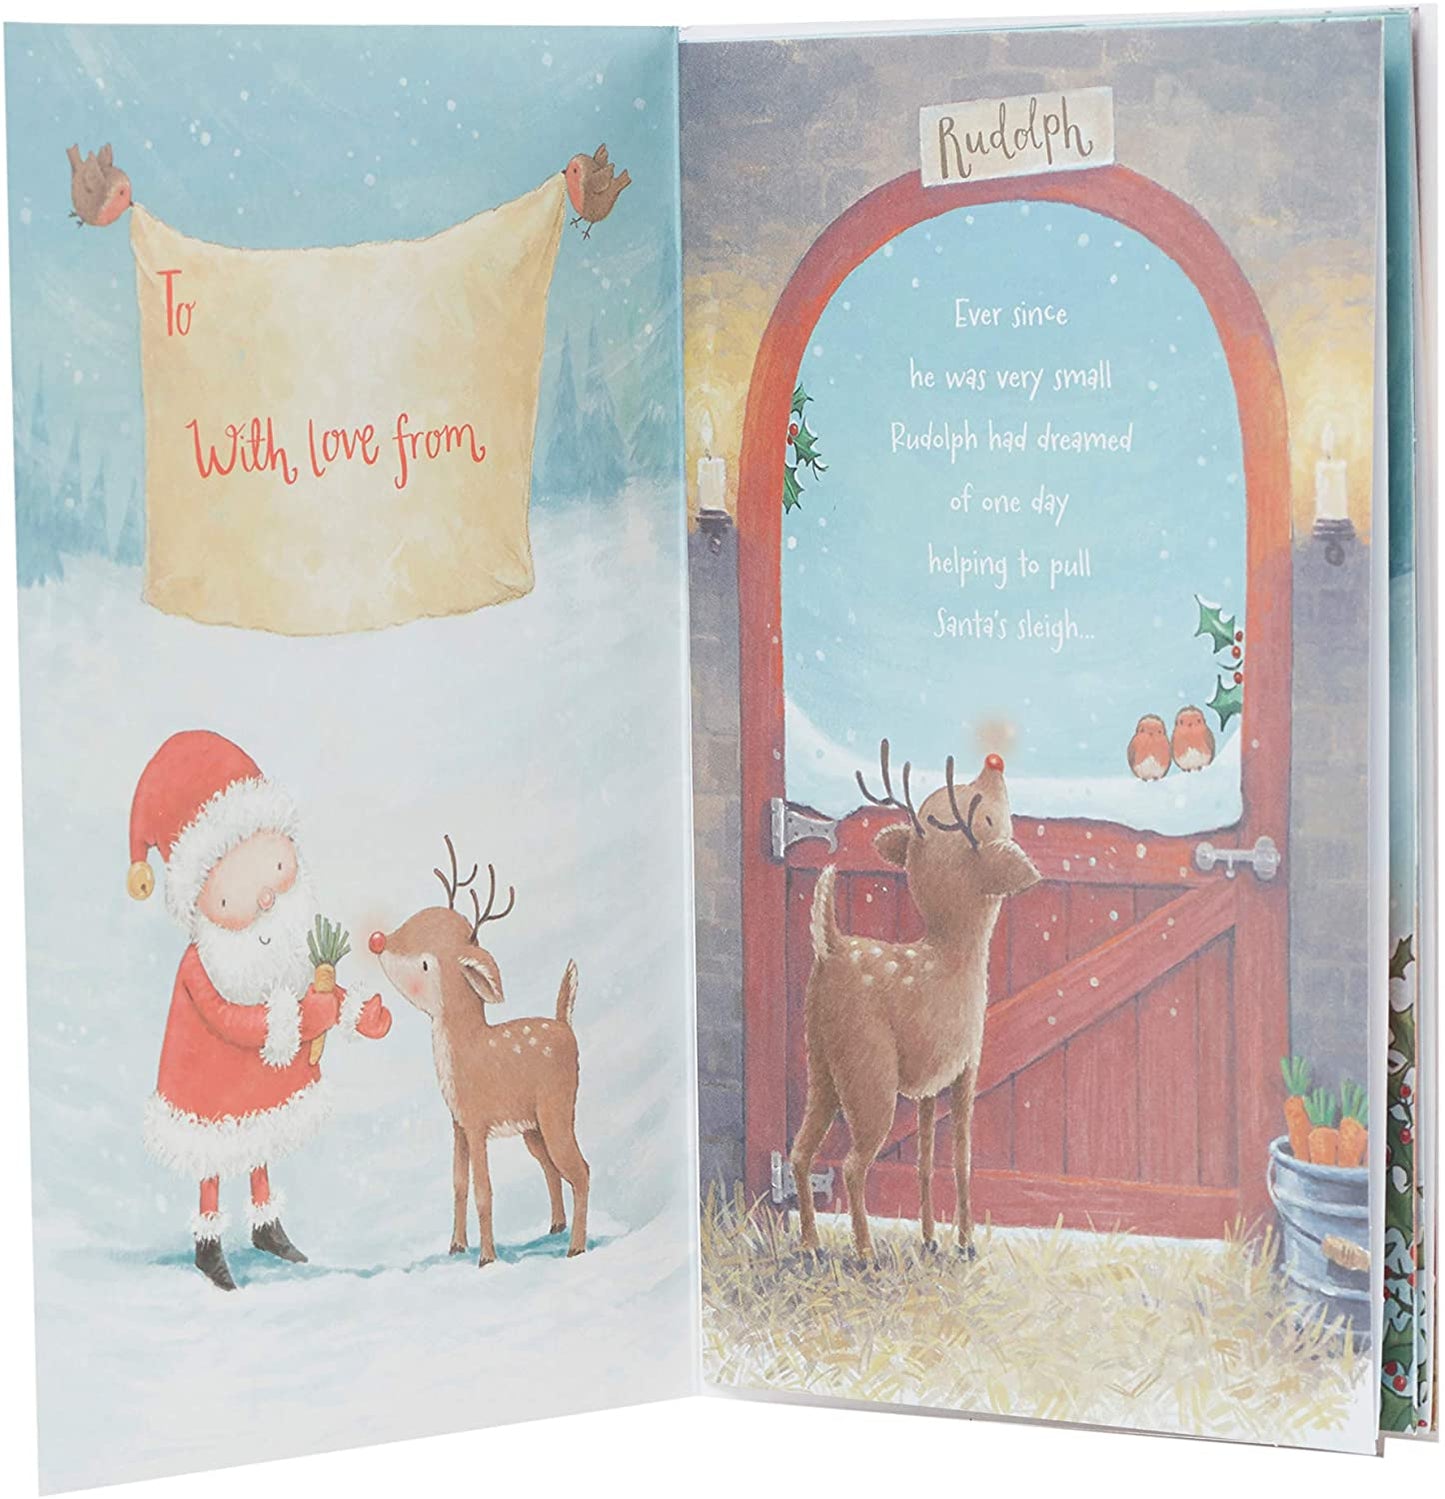 Brilliant Grandson Storybook About Rudolph and Santa Design Christmas Card